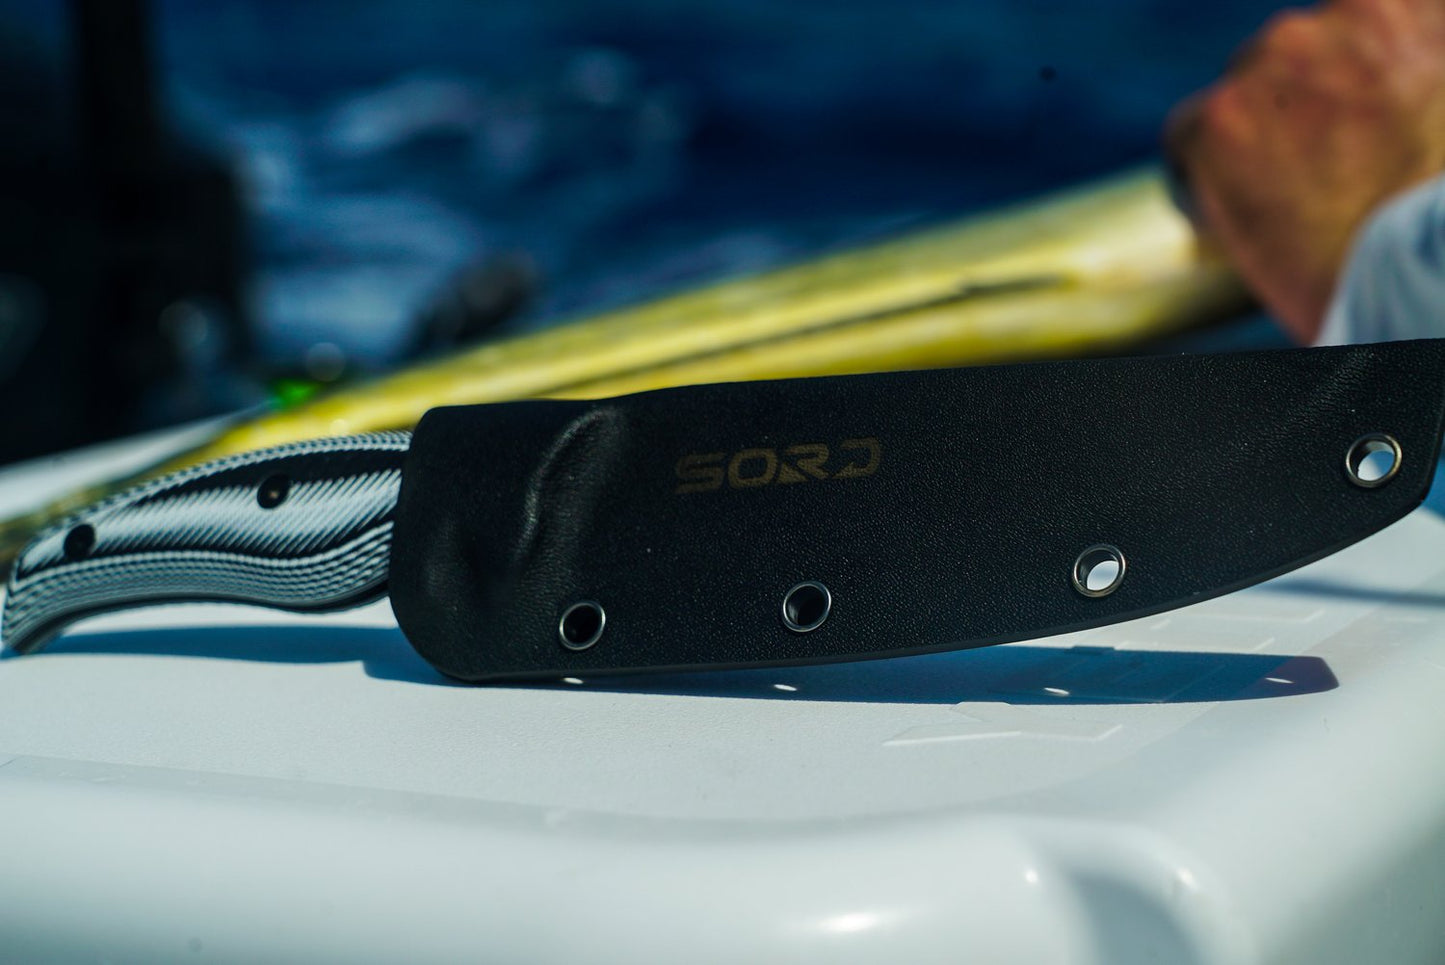 SORD Fishing Products - 5" Utility Knife - Bait Knife